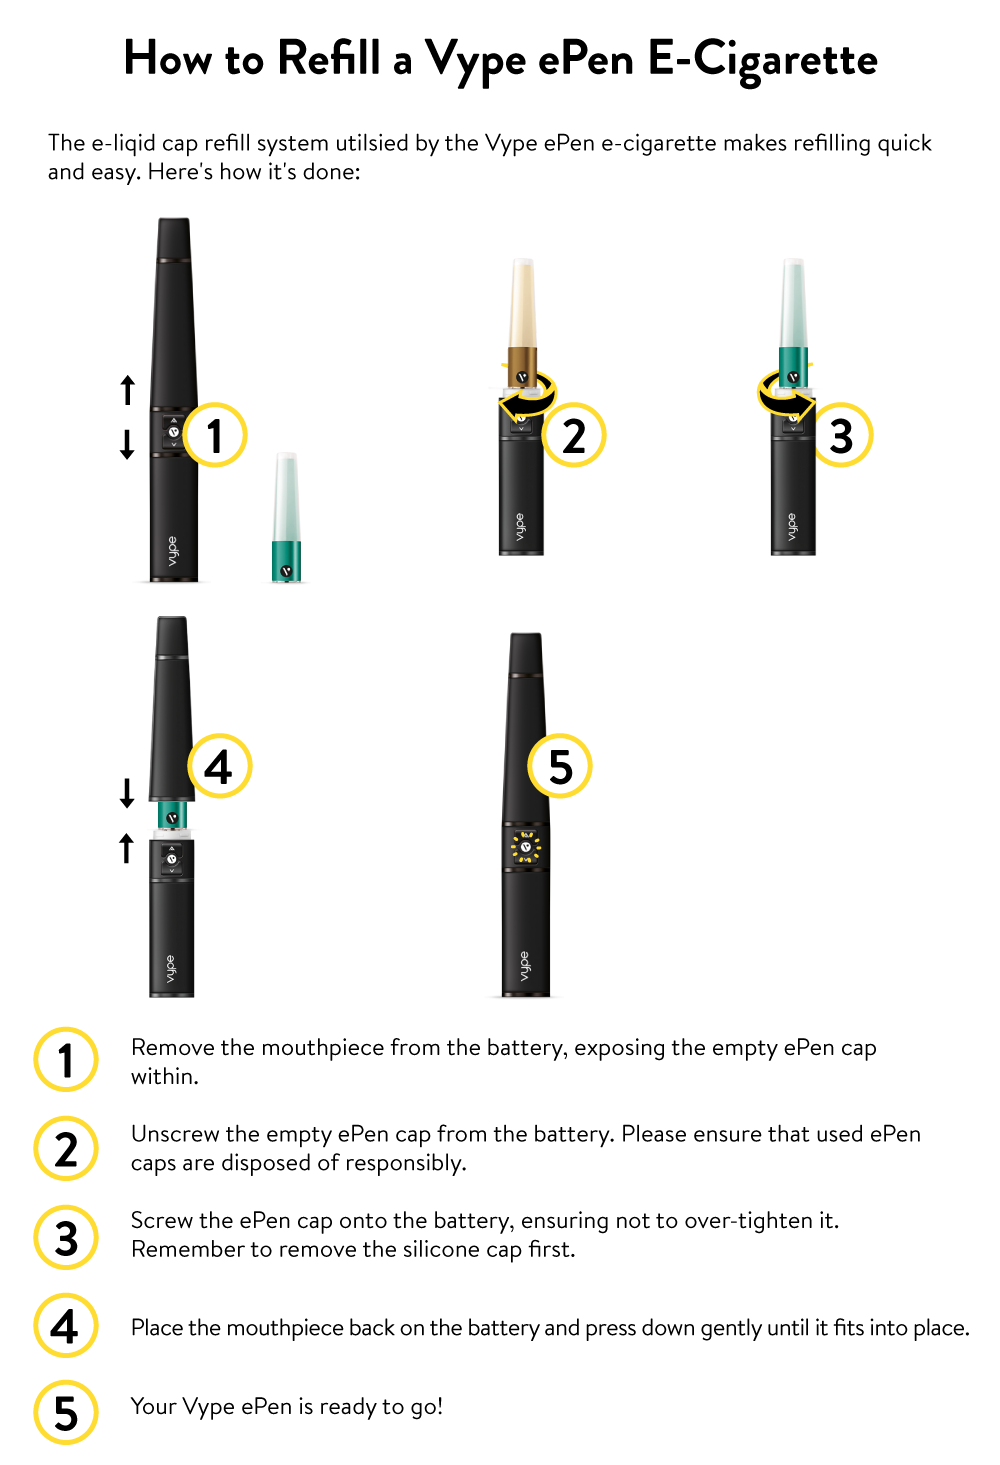 How To Refill The Vype ePen E-Cigarette